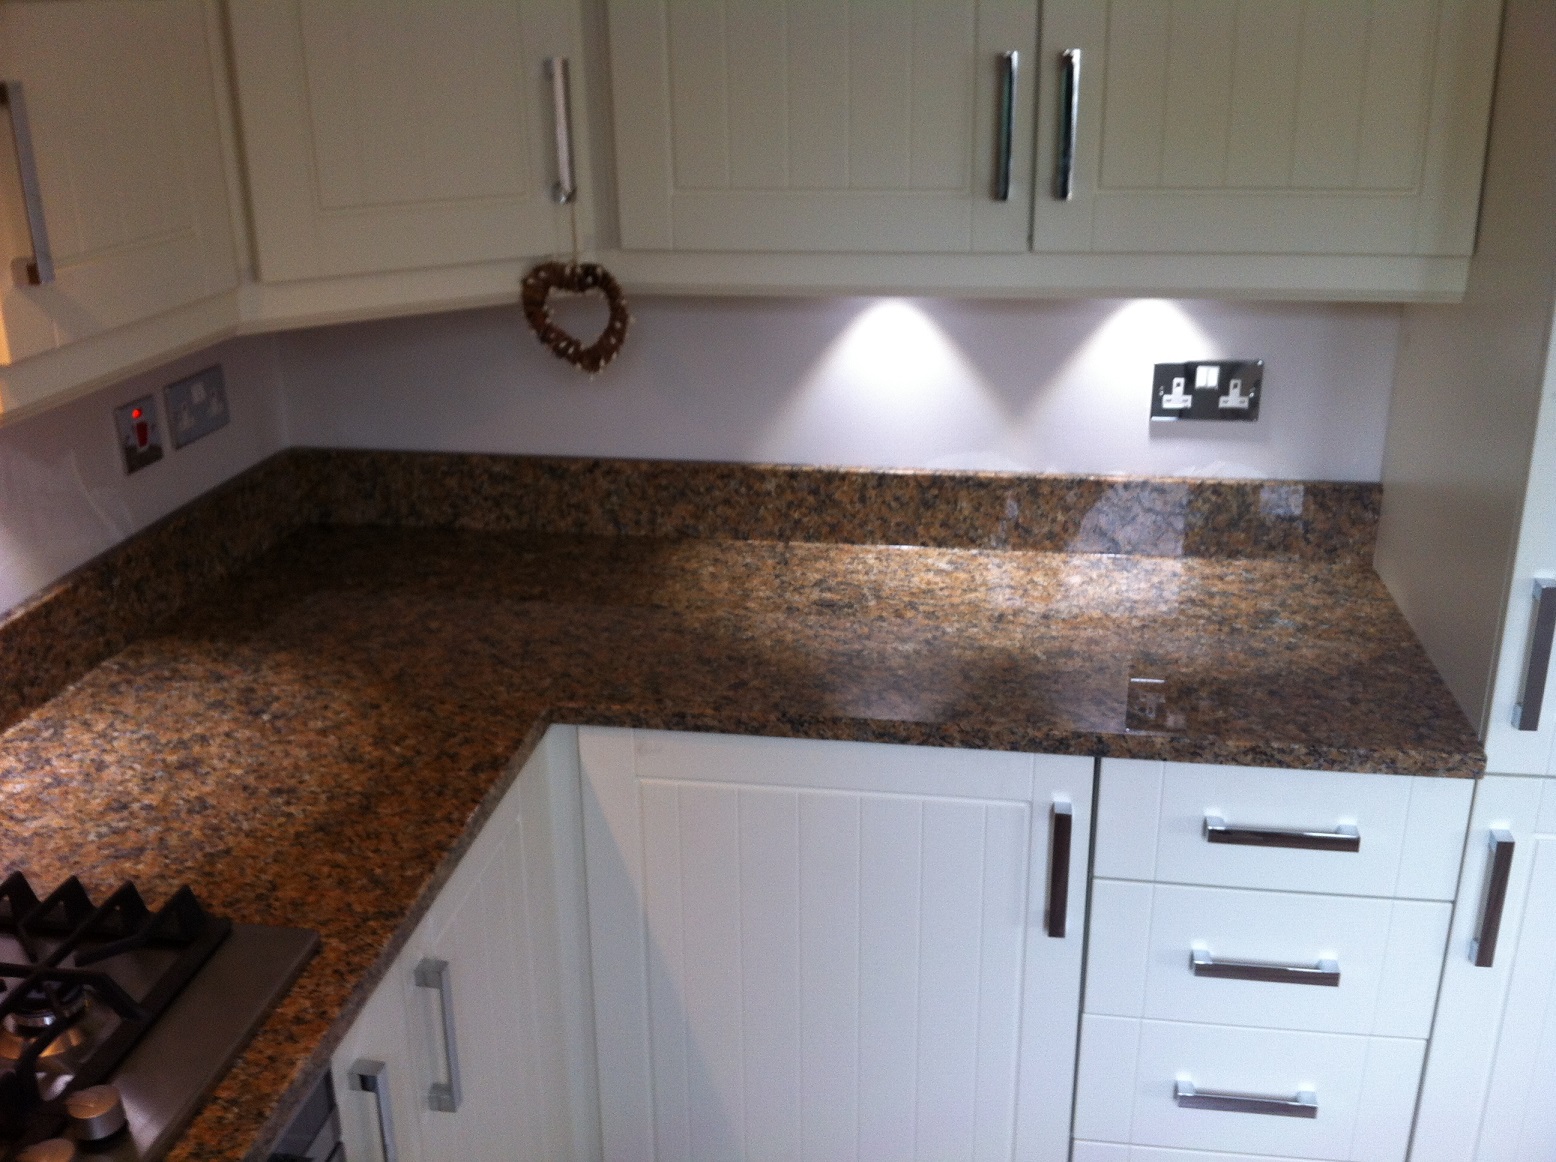 We supply Granite and Quartz Worktops in the basildon Area. We supply Granite and Quartz Worktops in the Wickford Area. We supply Granite and Quartz Worktops in the Rayleigh Area. We supply Granite and Quartz Worktops in the Southend-on-Sea Area. We supply Granite and Quartz Worktops in the Canvey-Island Area. We supply Granite and Quartz Worktops in the Corringham Area. We supply Granite and Quartz Worktops in the Grays Area. We supply Granite and Quartz Worktops in the Brentwood Area. We supply Granite and Quartz Worktops in the Romford Area. We supply Granite and Quartz Worktops in the Dagenham Area. We supply Granite and Quartz Worktops in the Billericay Area. We supply Granite and Quartz Worktops in the Shoeburyness Area. We supply Granite and Quartz Worktops in the South-Benfleet Area. We supply Granite and Quartz Worktops in the Rawreth Area. We supply Granite and Quartz Worktops in the Battlesbridge Area. We supply Granite and Quartz Worktops in the Rochford Area. We supply Granite and Quartz Worktops in the Hockley Area. We supply Granite and Quartz Worktops in the Hadleigh Area. We supply Granite and Quartz Worktops in the Orsett Area. We supply Granite and Quartz Worktops in the Hornchurch Area. We supply Granite and Quartz Worktops in the town20 Area.